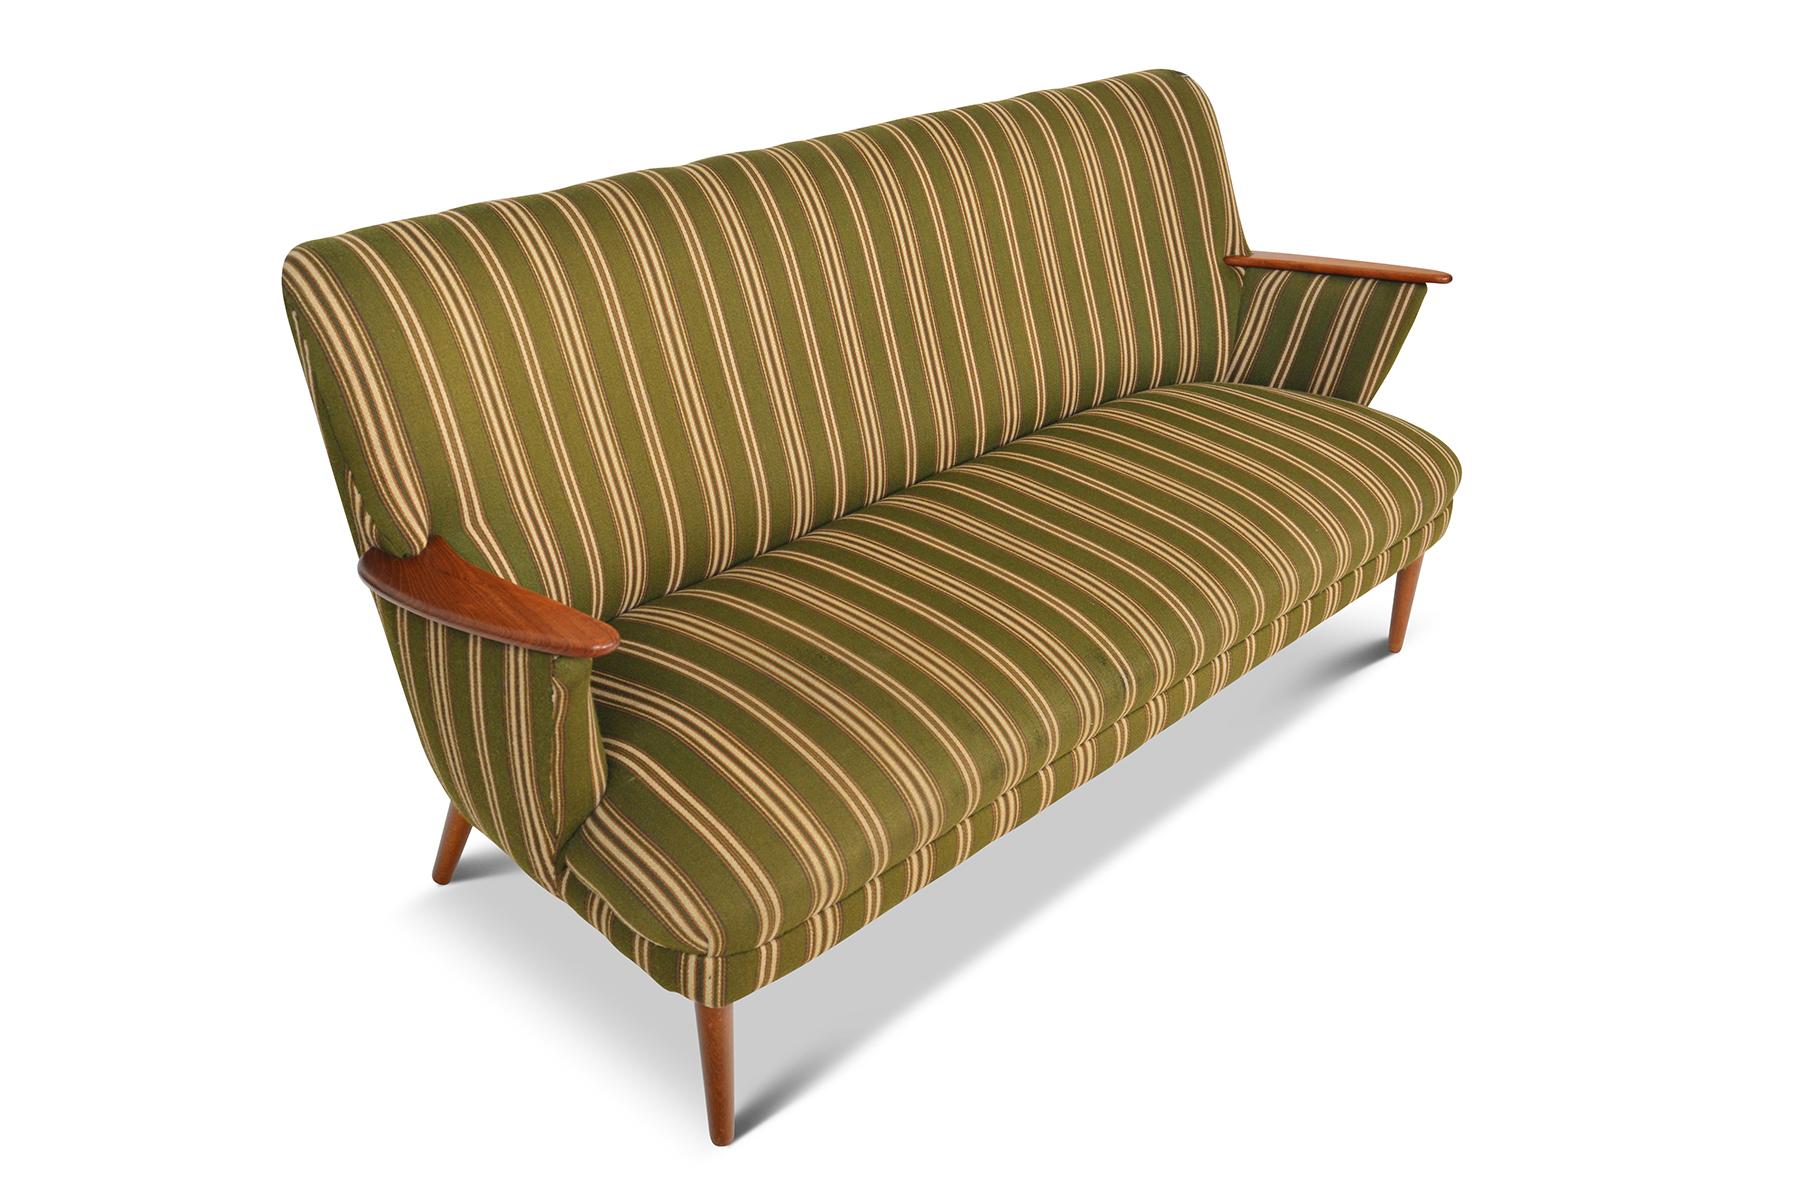 Origin: Denmark
Designer: Unknown
Manufacturer: Unknown
Era: 1960s
Materials: Teak
Measurements: 67? Width x 26? Depth x 31? Height

Condition: In excellent original condition. Fabric has some vintage wear. Price includes new upholstery in